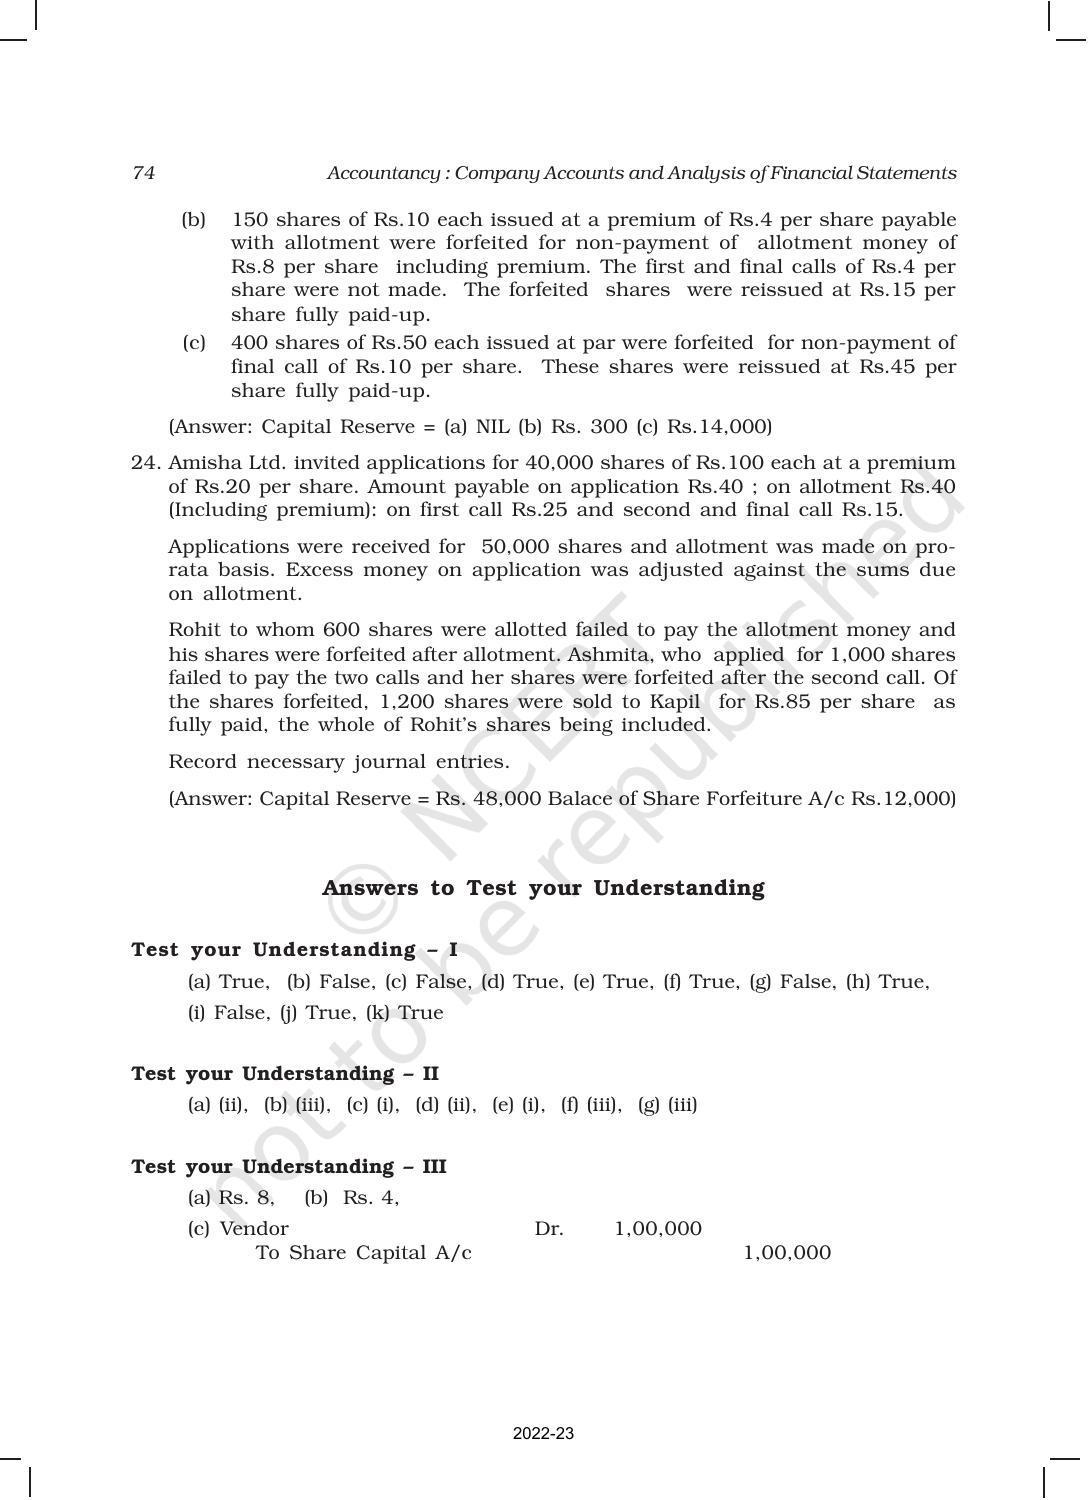 NCERT Book for Class 12 Accountancy Part II Chapter 1 Accounting for Share Capital - Page 74